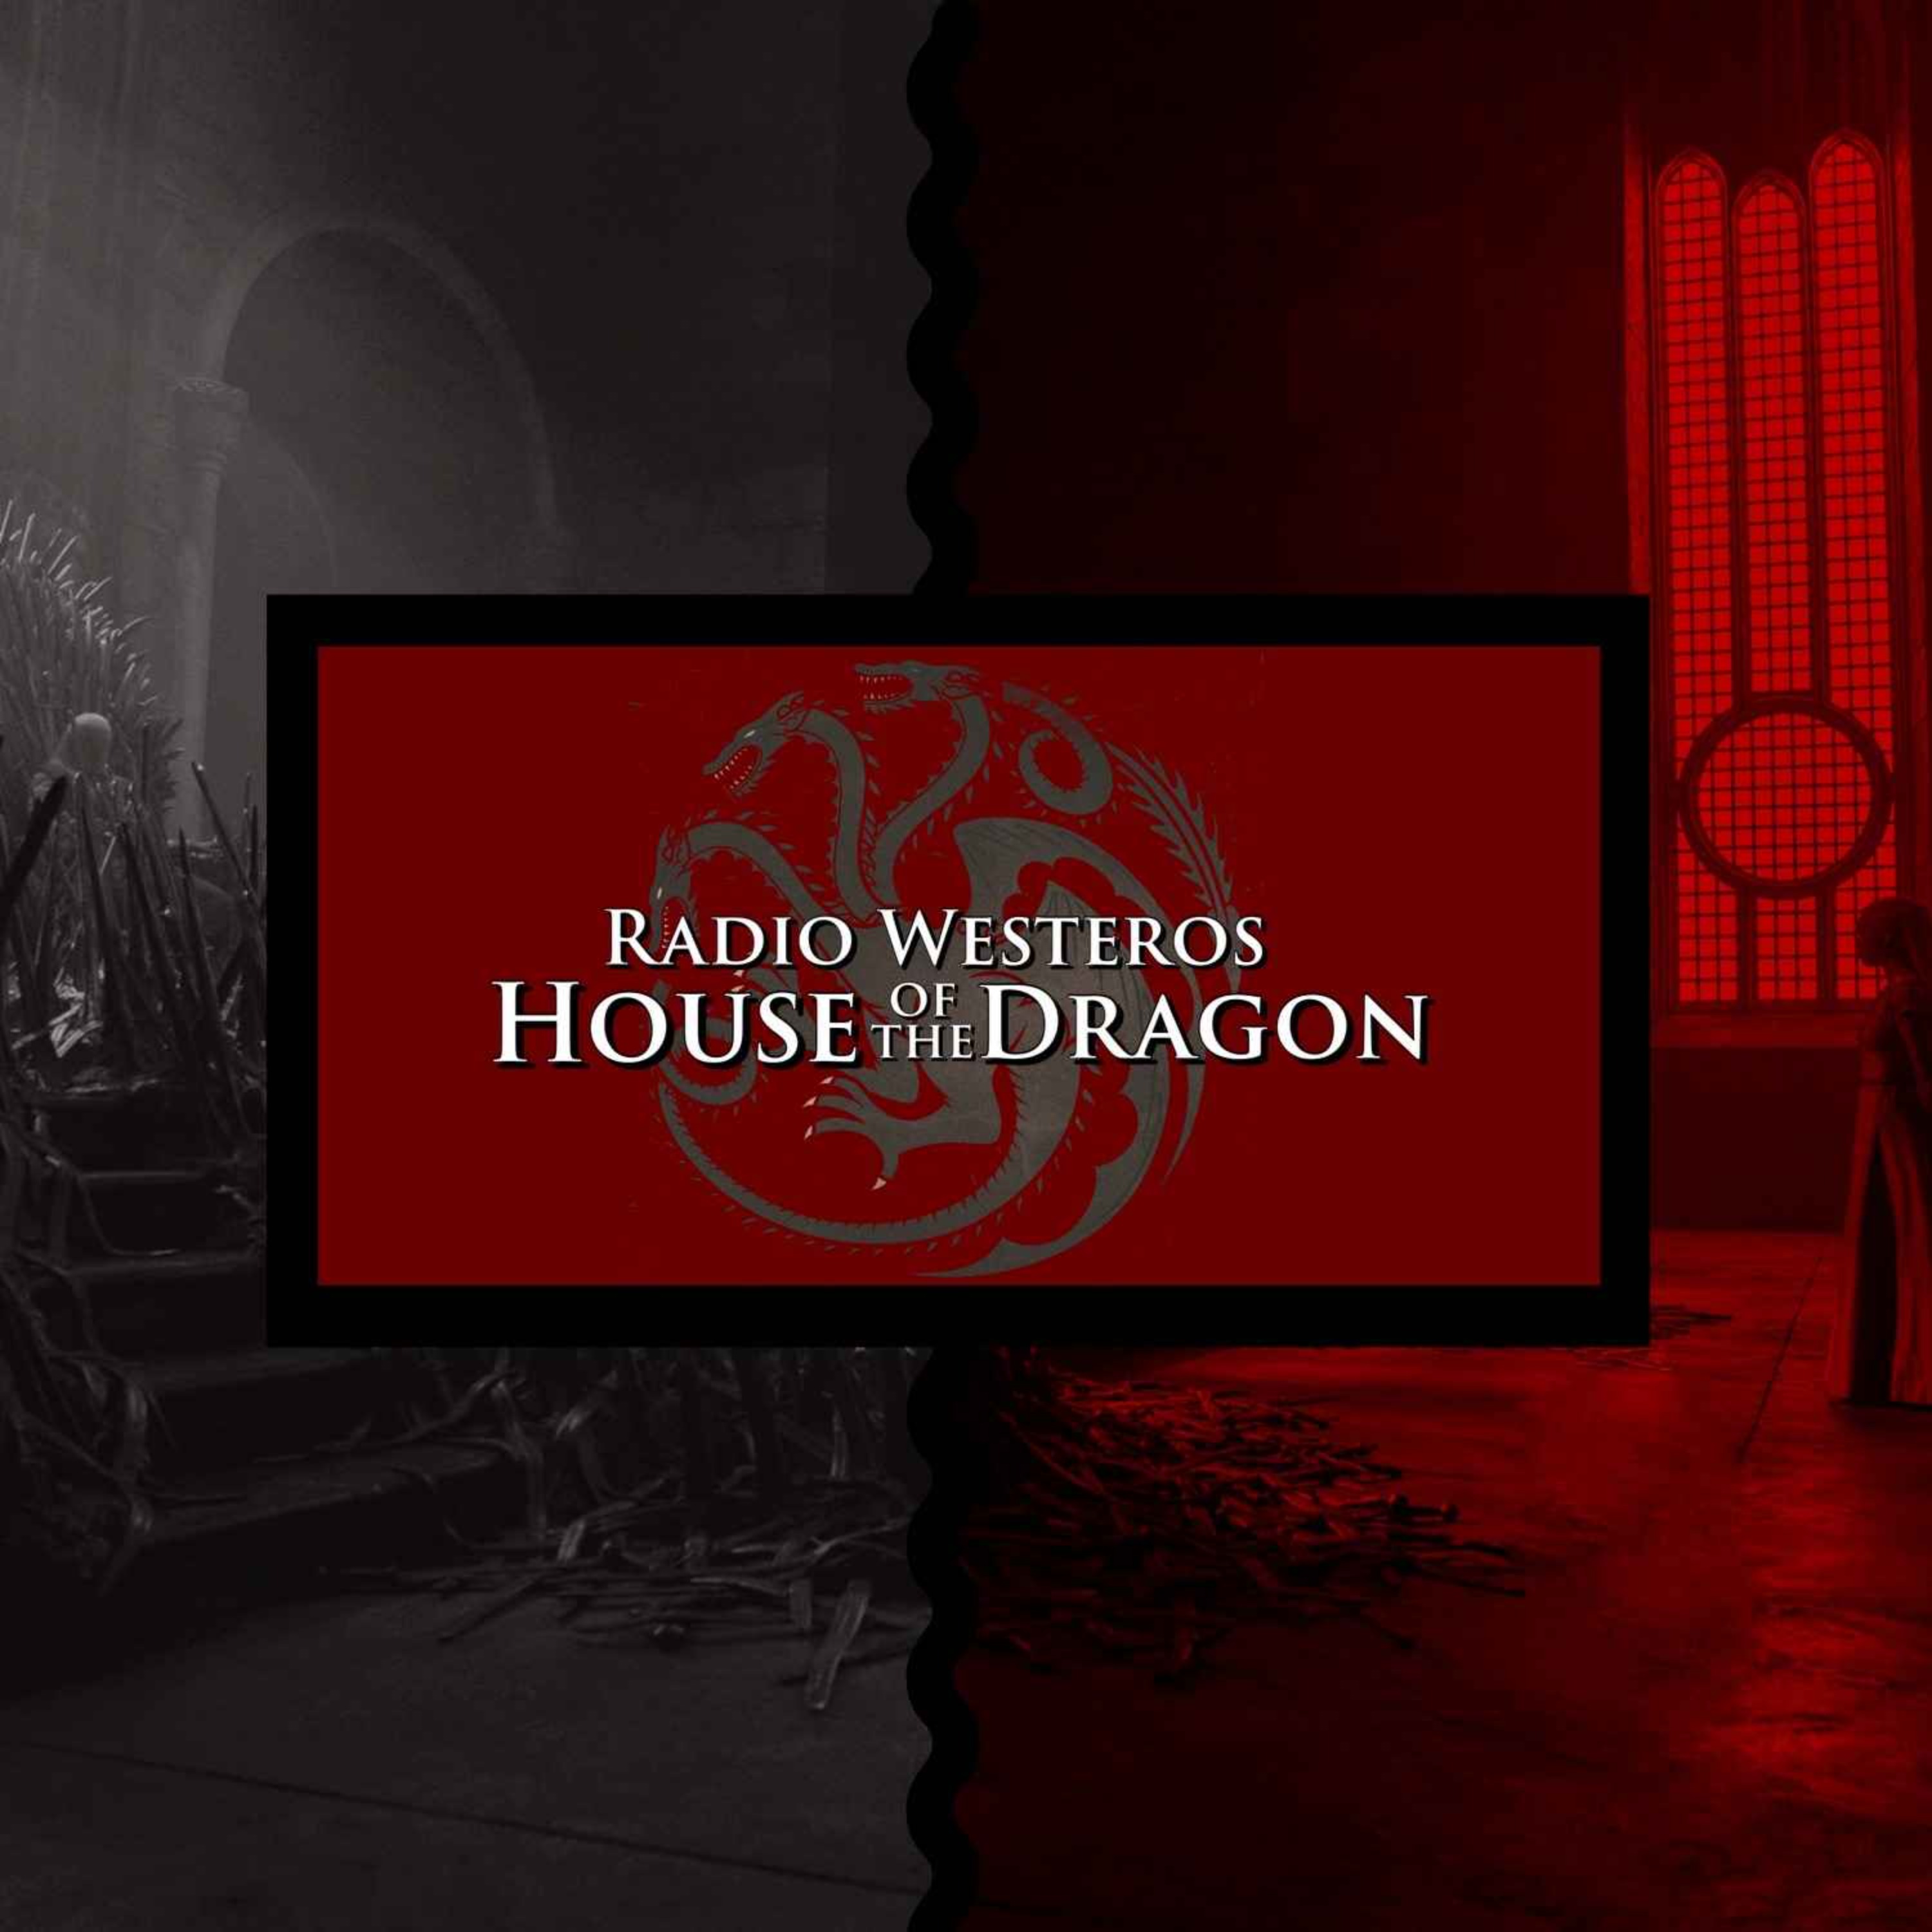 House of the Dragon, S1E10 - The Black Queen